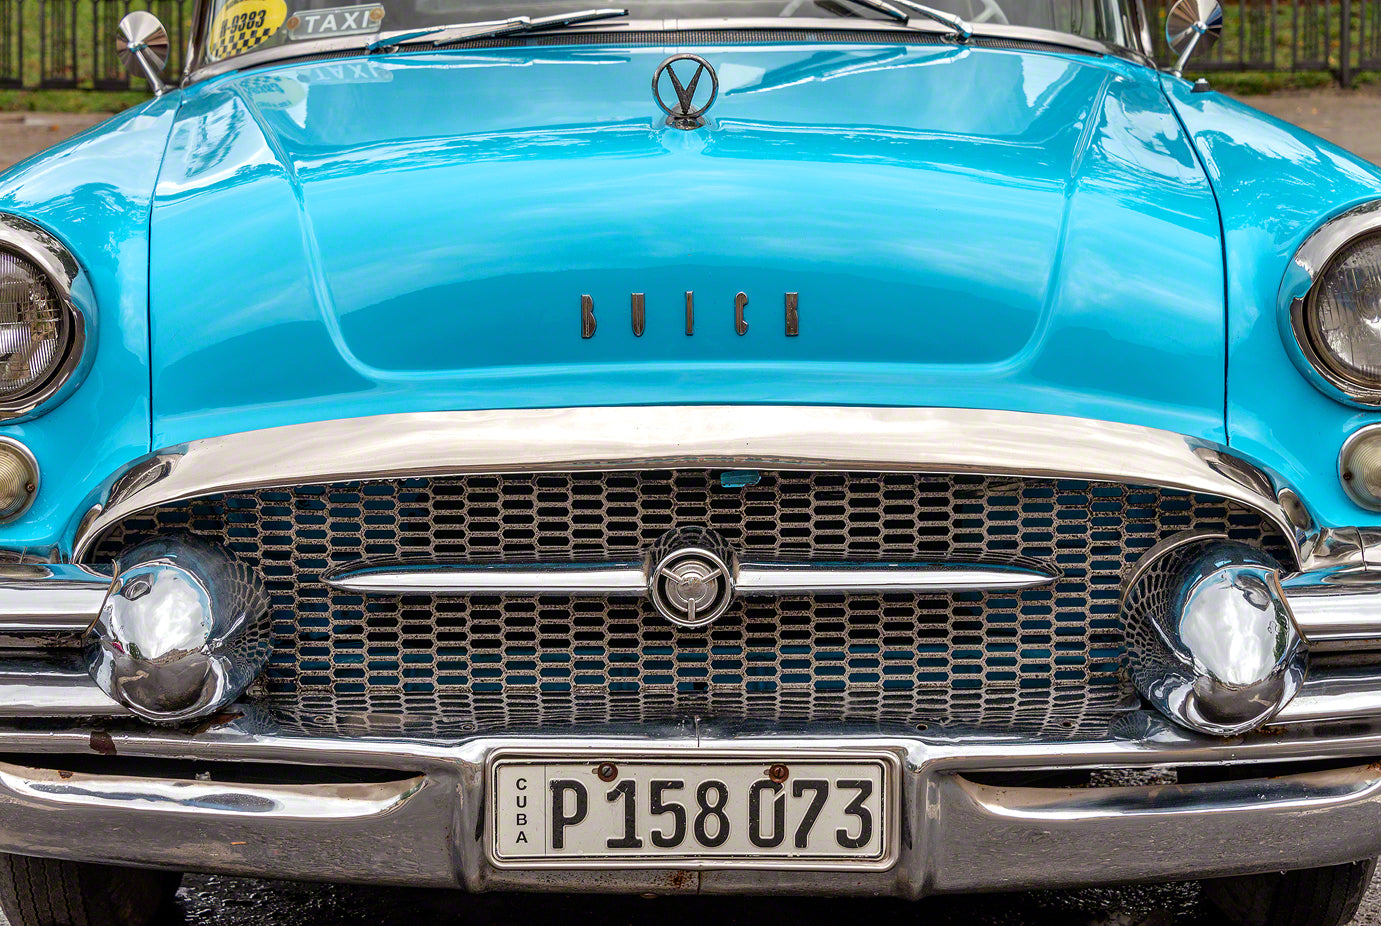 A photo of an old classic American car used as a taxi in Cuba